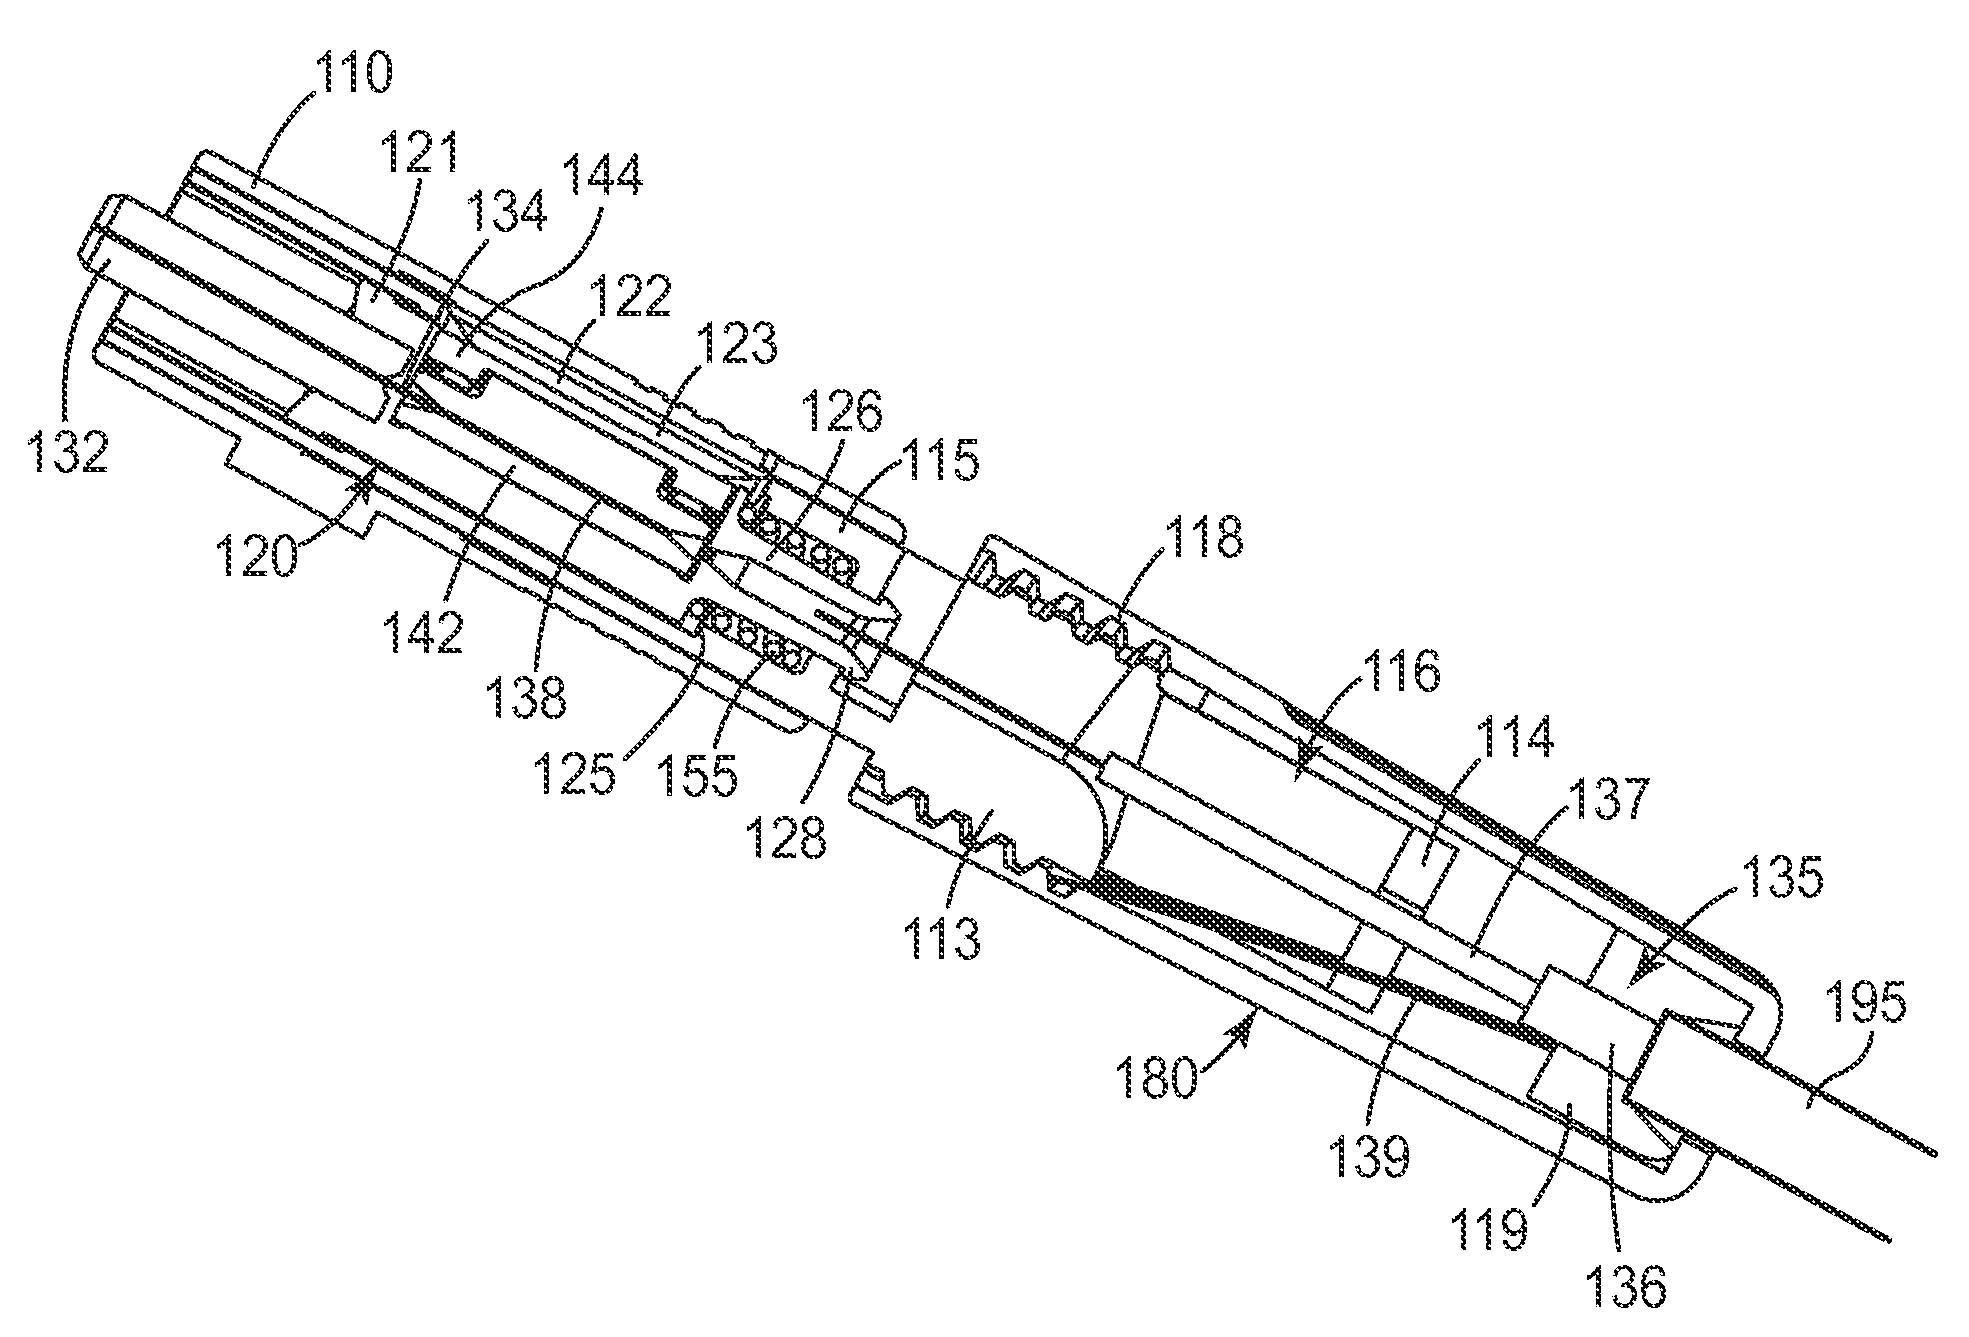 Field installed optical fiber connector for jacketed fiber cable and termination method